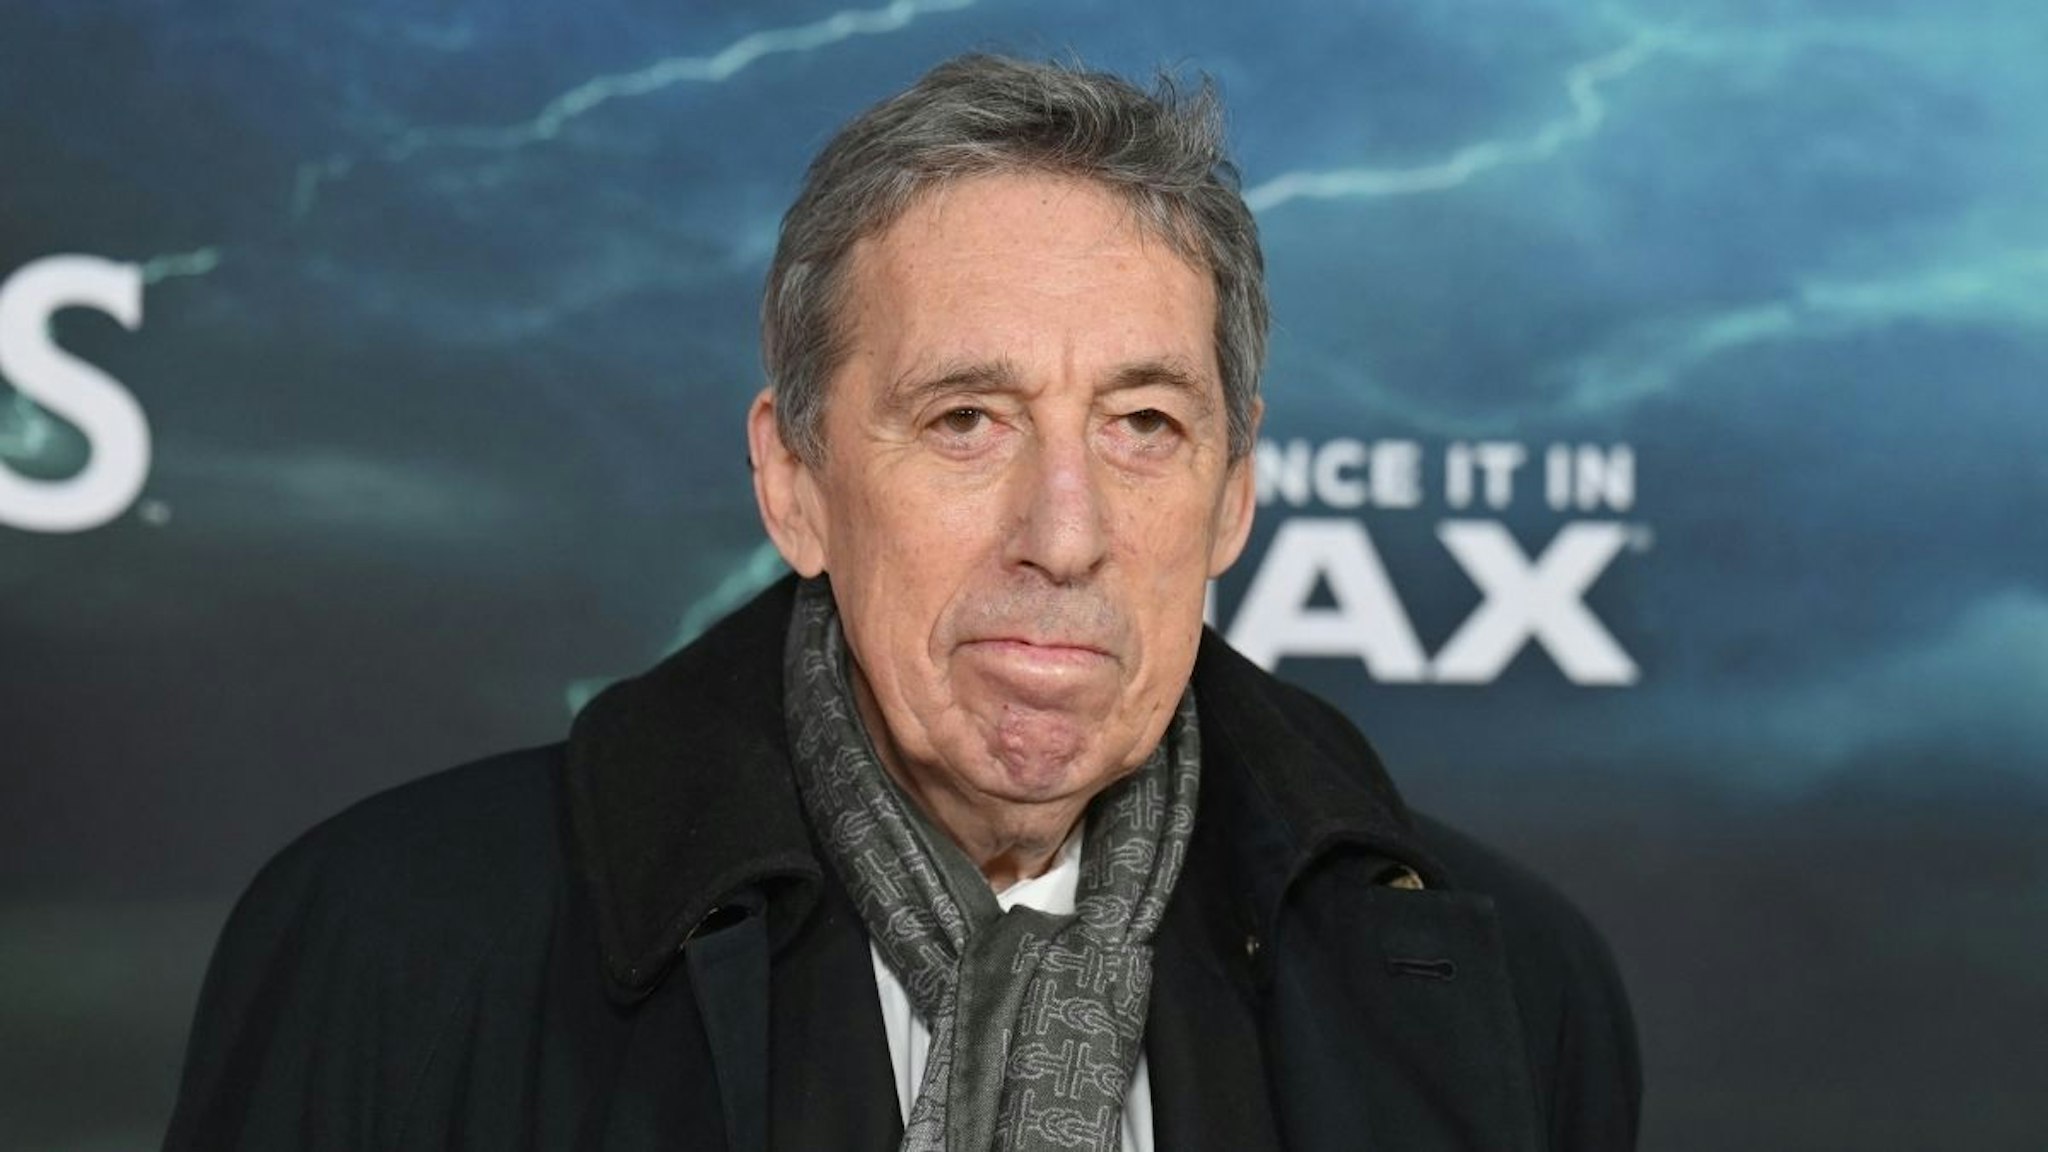 Canadian filmmaker Ivan Reitman attends the "Ghostbusters: Afterlife" New York premiere at AMC Lincoln Square on November 15, 2021 in New York City.